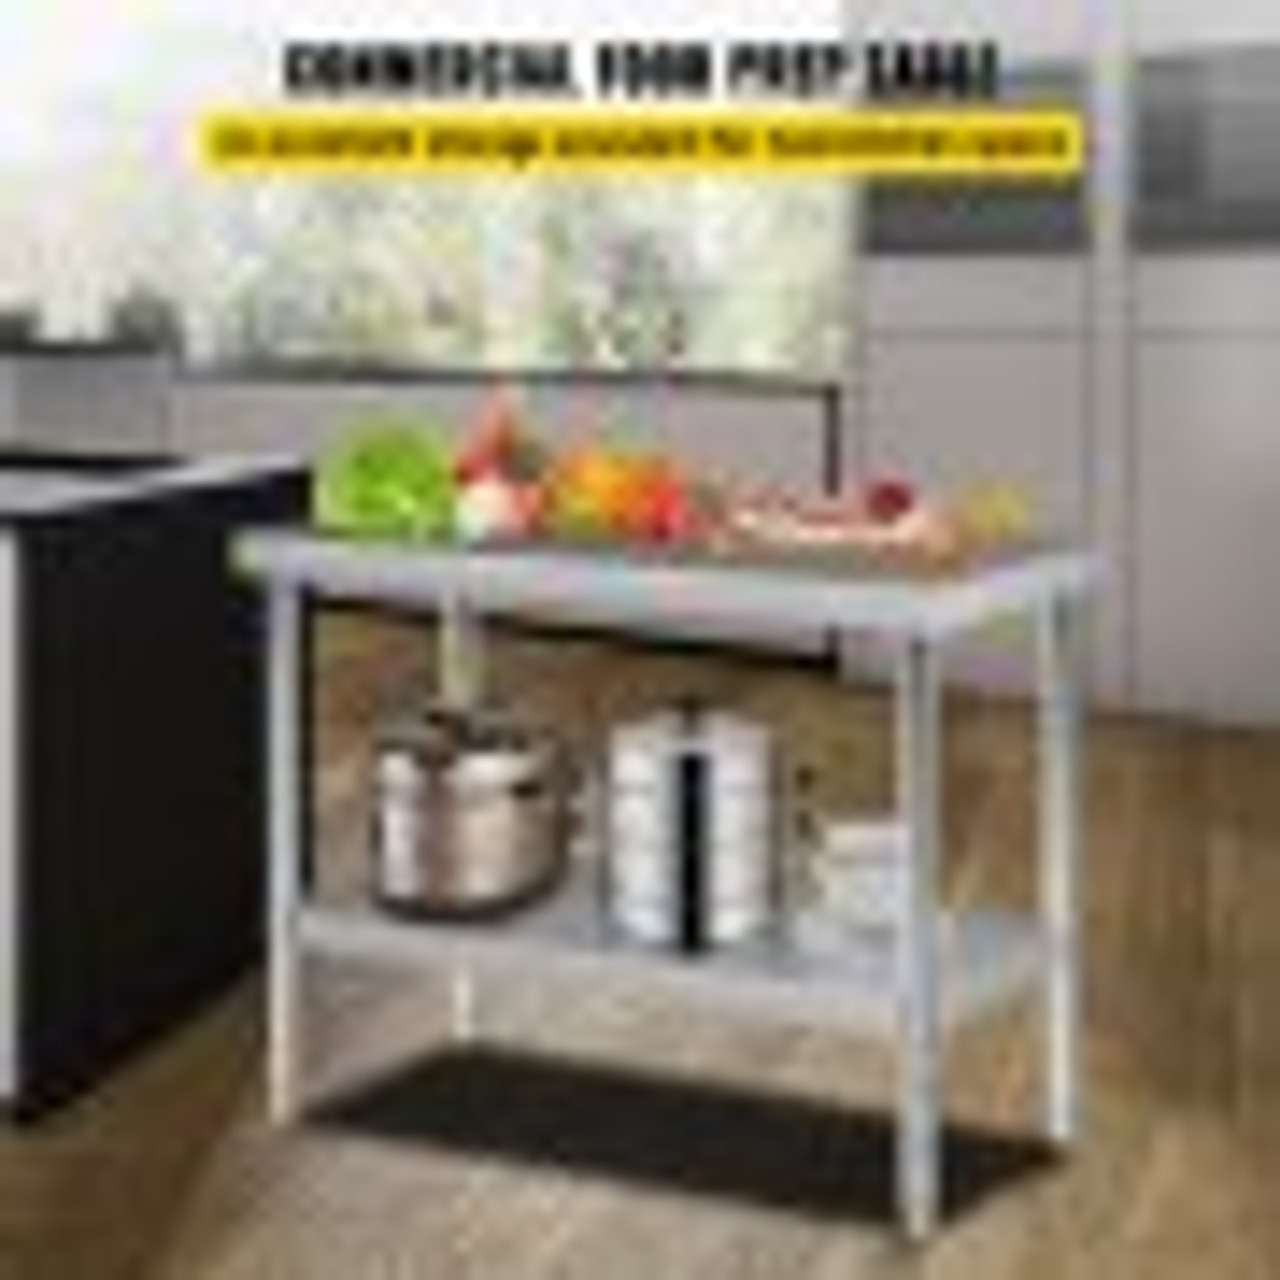 Stainless Steel Prep Table, 48 x 18 x 34 Inch, 550lbs Load Capacity Heavy Duty Metal Worktable with Adjustable Undershelf, Commercial Workstation for Kitchen Restaurant Garage Backyard